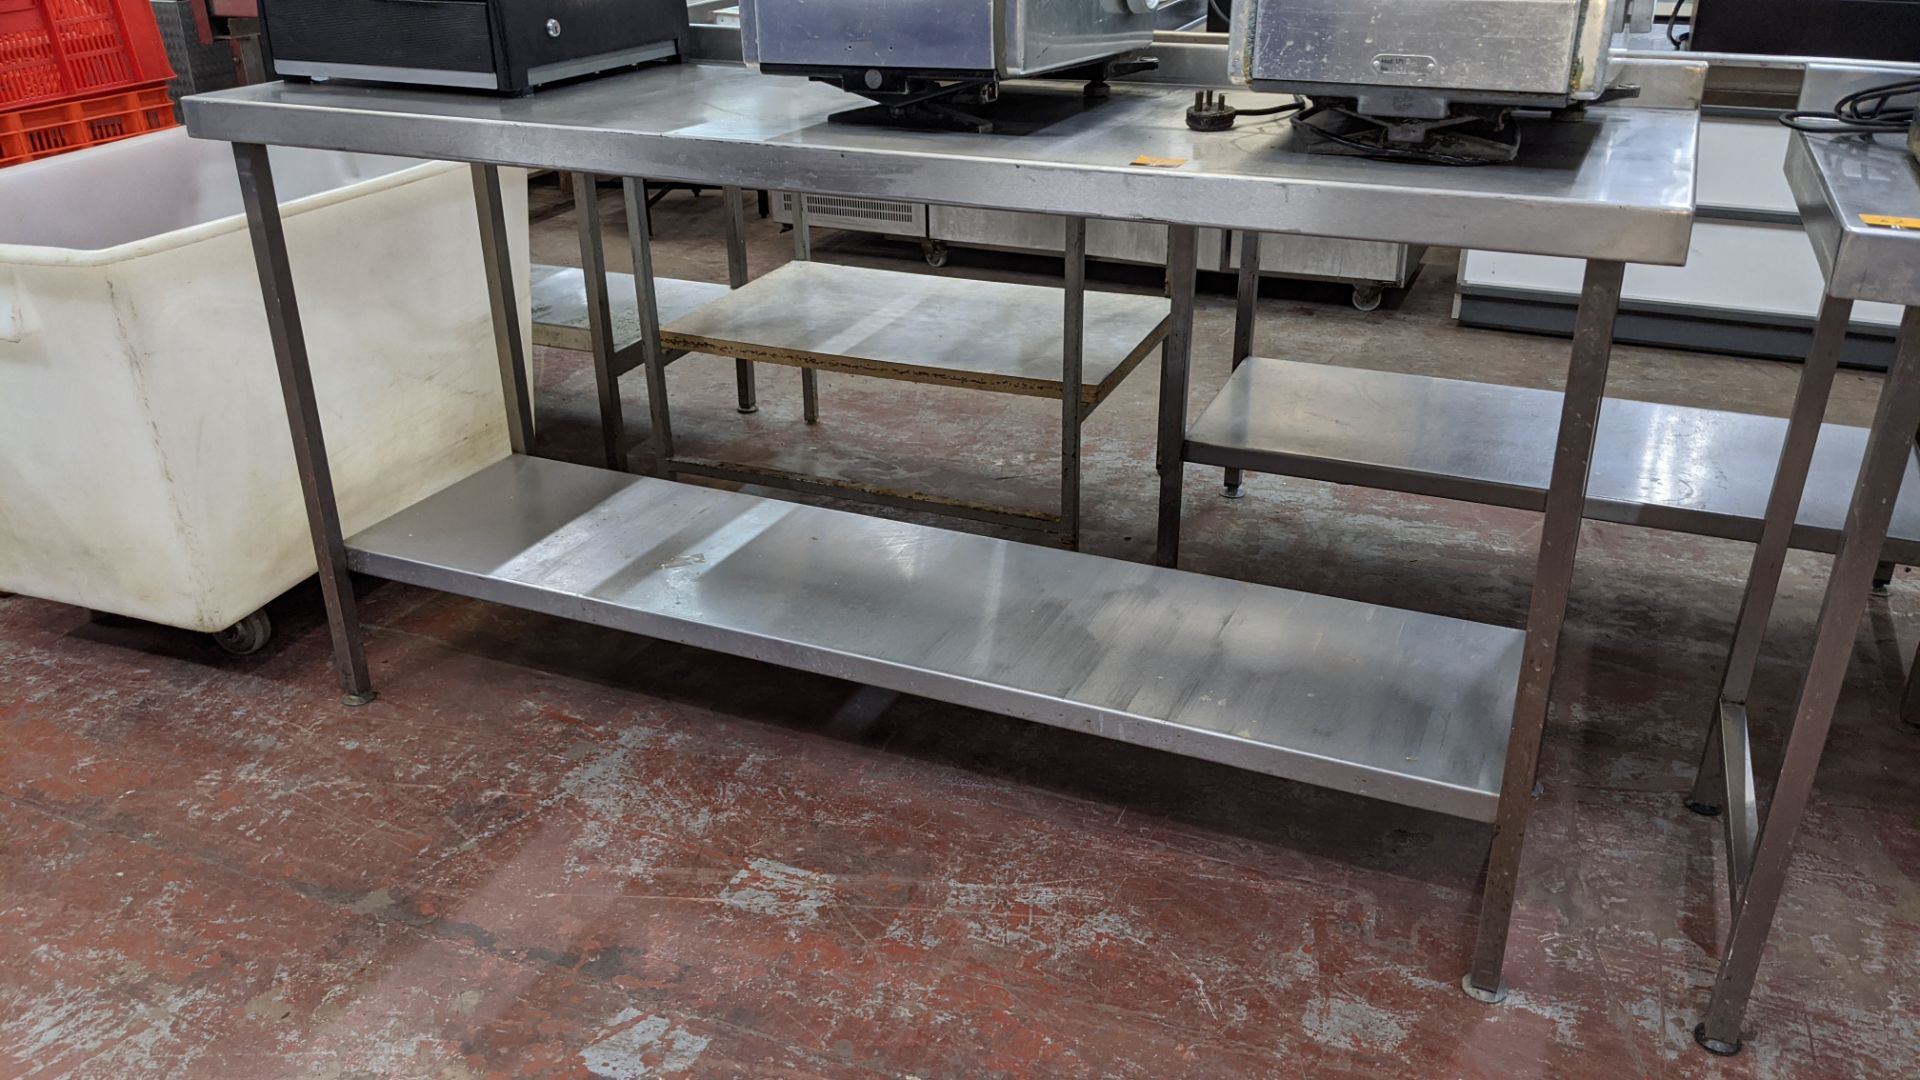 Stainless steel twin tier table, table top measuring approximately 1795mm x 600mm - Image 2 of 3